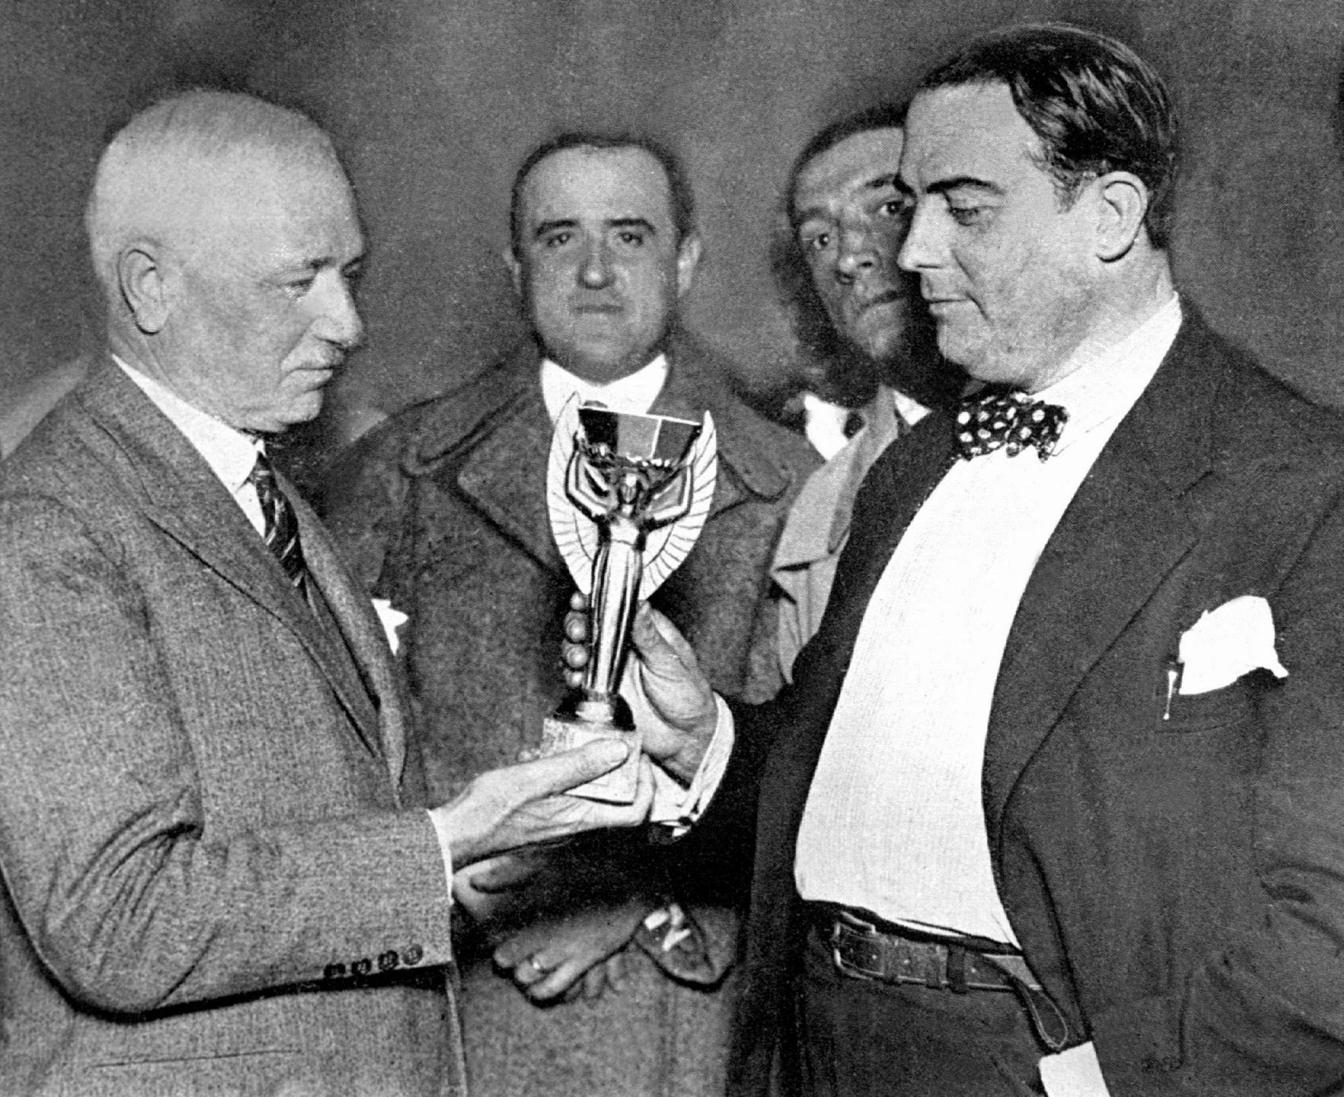 renchman Jules Rimet (L), head of the Federation Internationale de Football Association (FIFA) hands over the World Cup trophy to Dr Raul Jude, president of the Uruguayan football association 05 July 1930 in Montevideo.